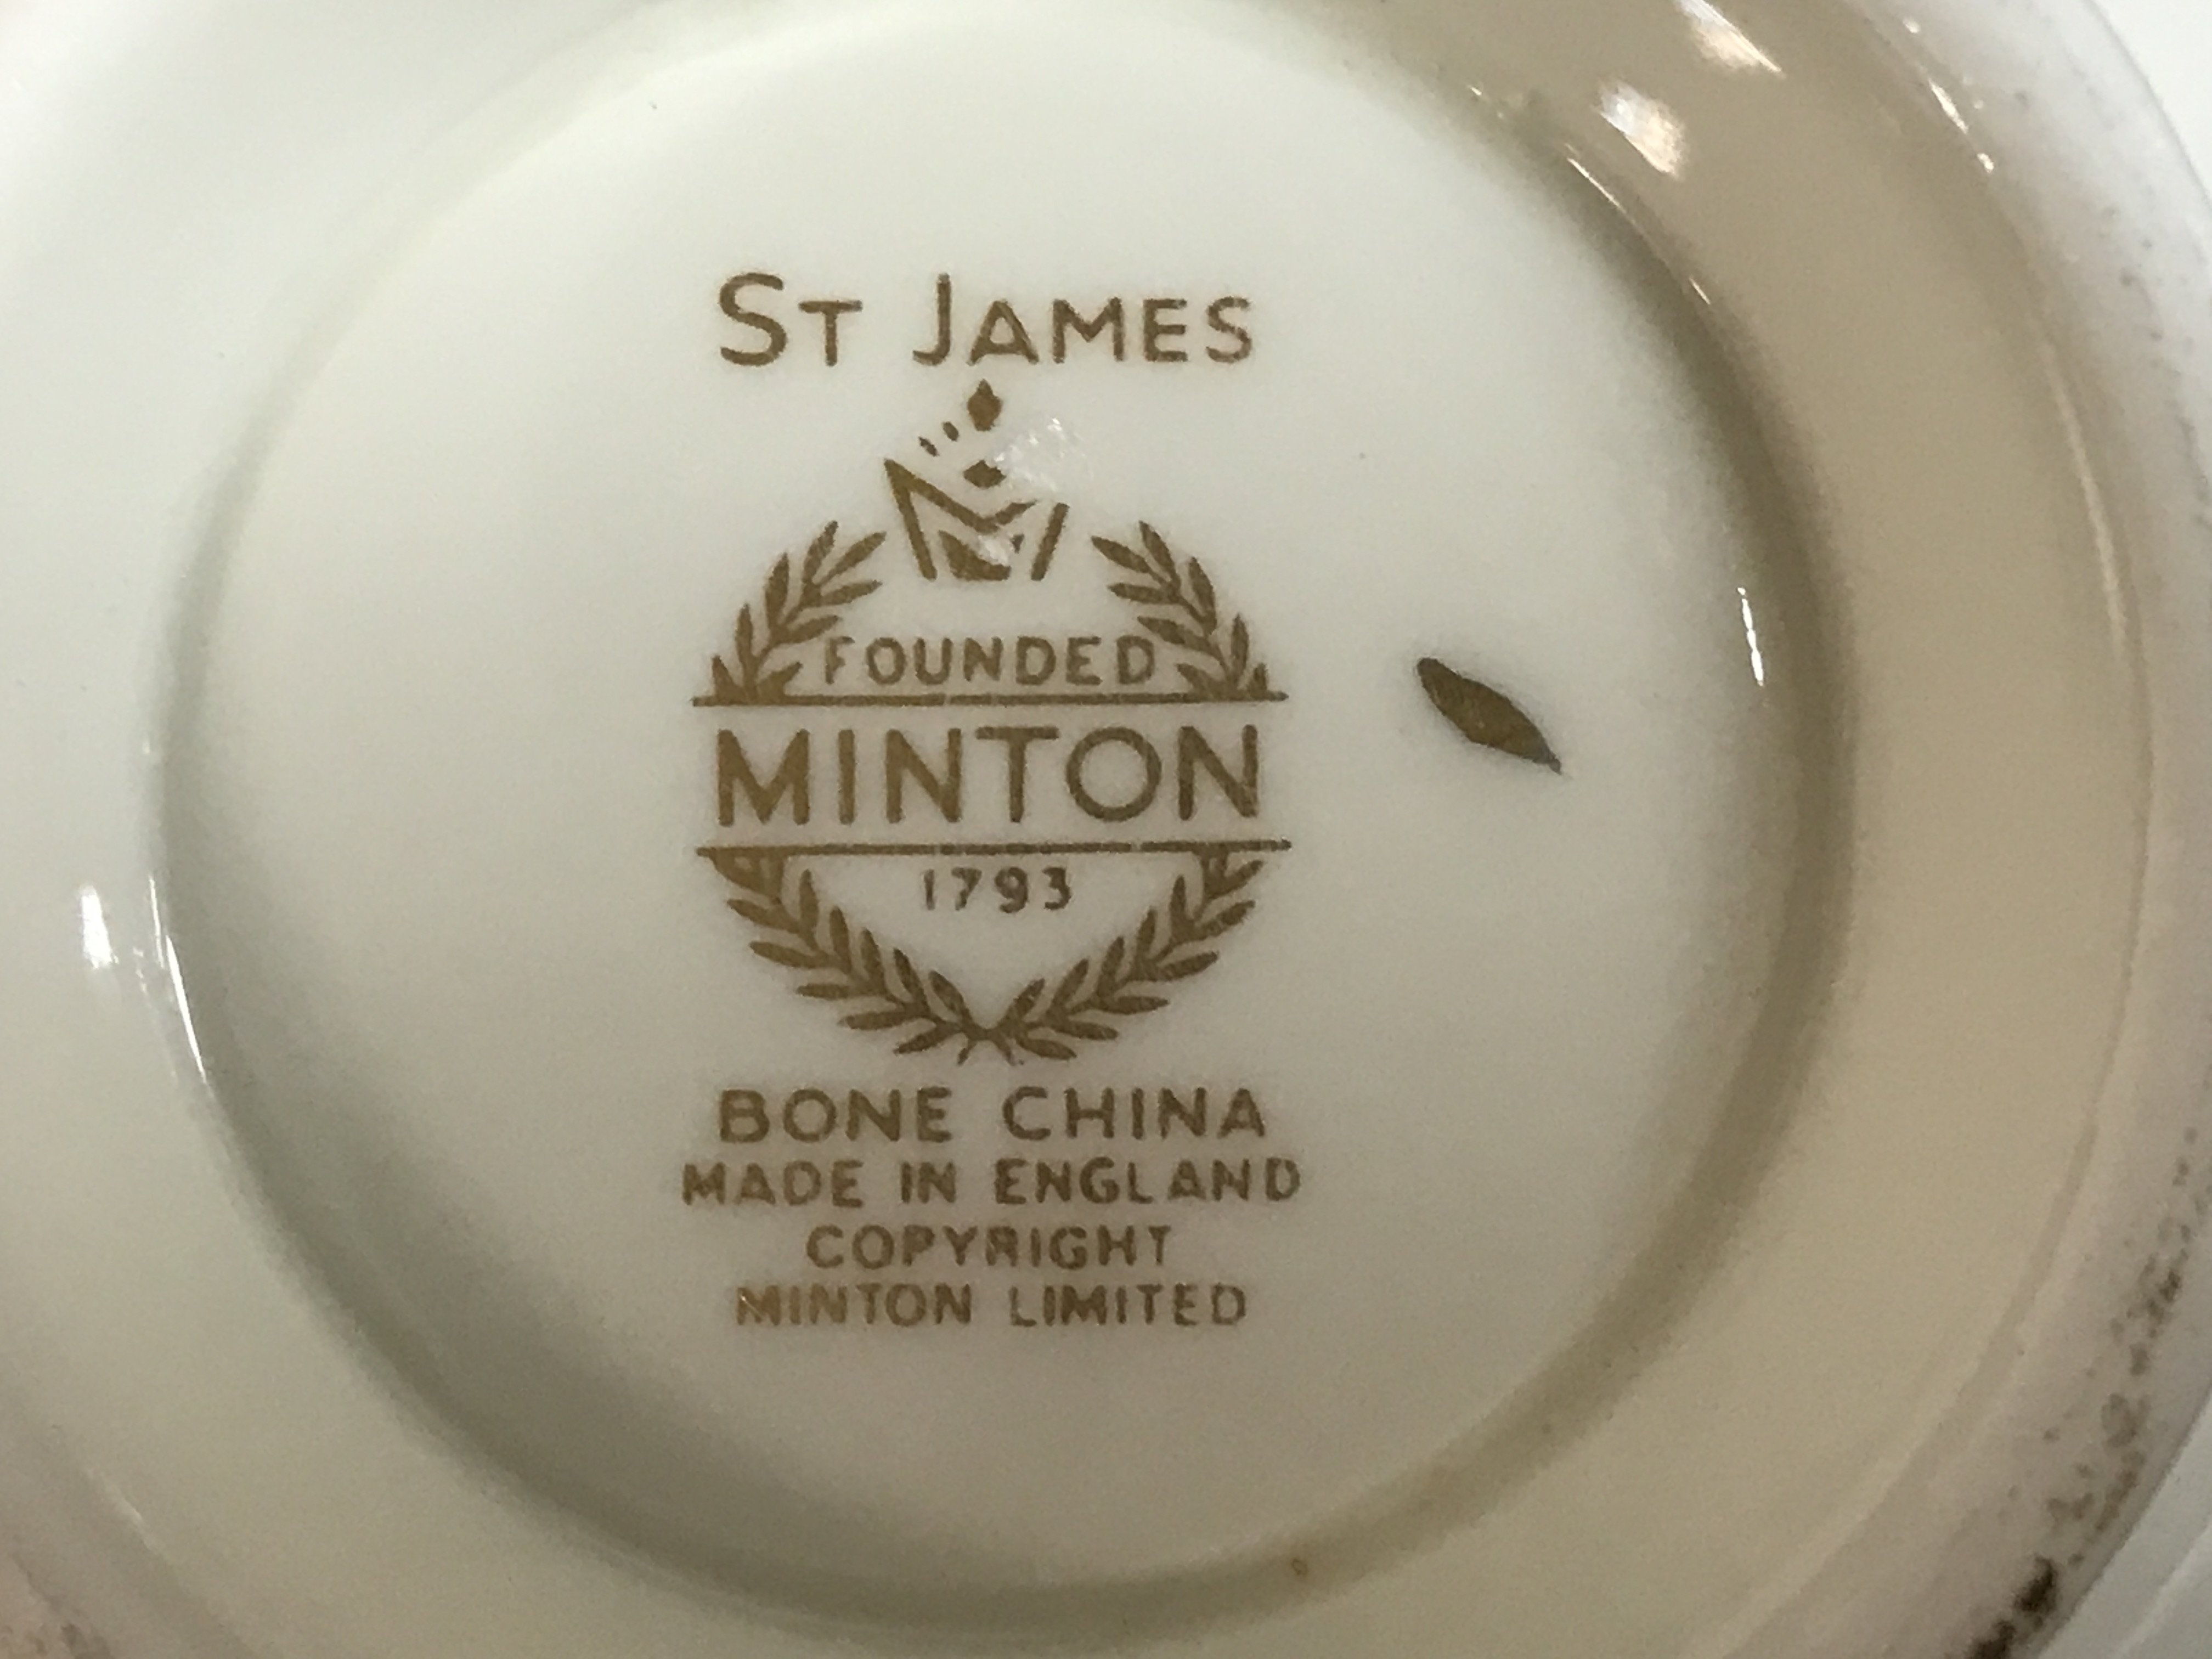 A Minton St James dinner service including plates, - Image 3 of 3